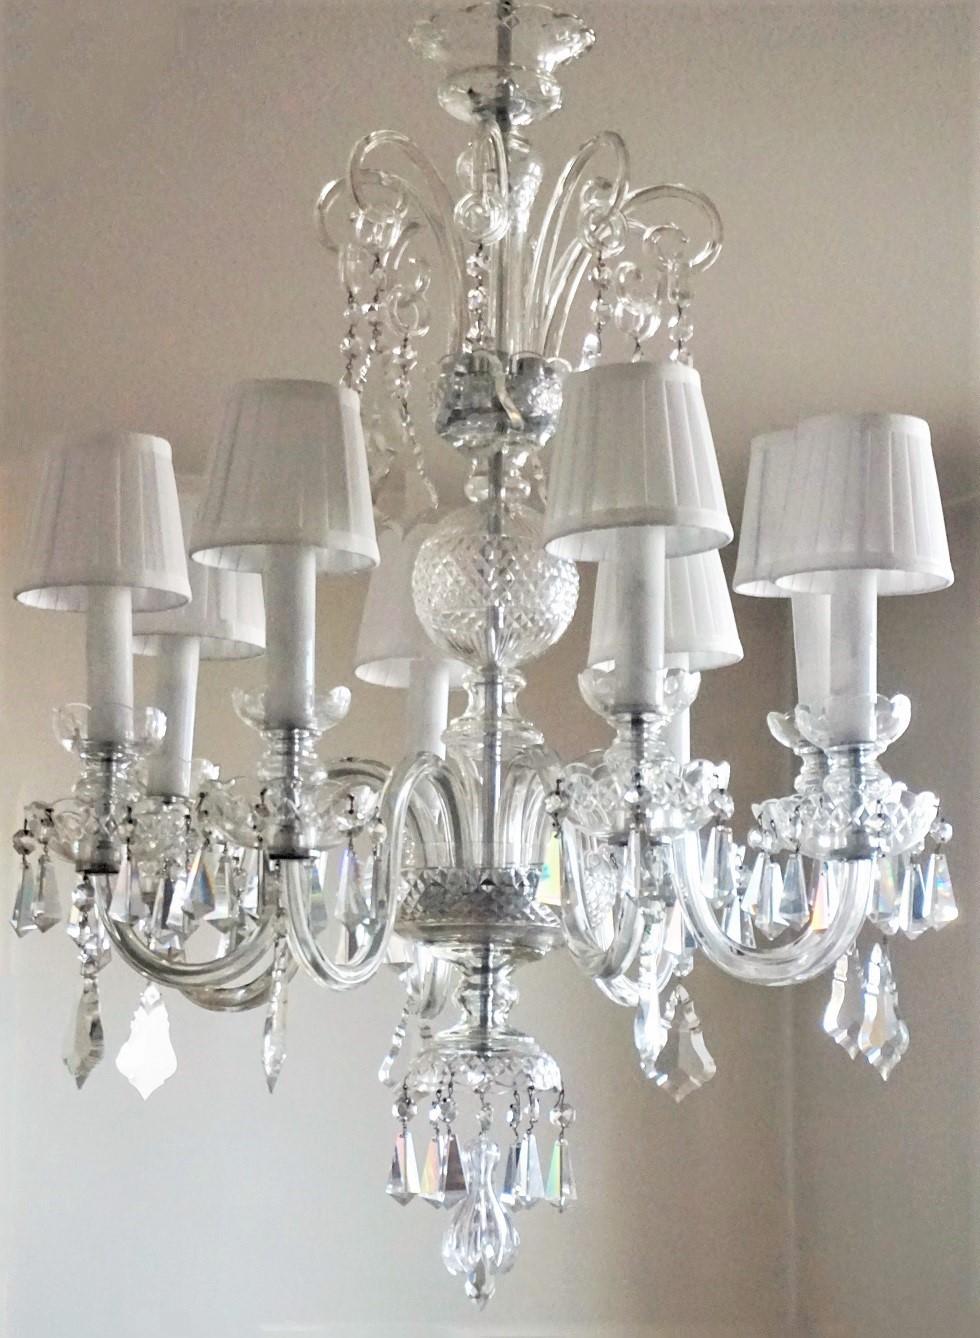 Silvered Large Murano Glass Crystal Chandelier, Italy, 1910-1920 For Sale